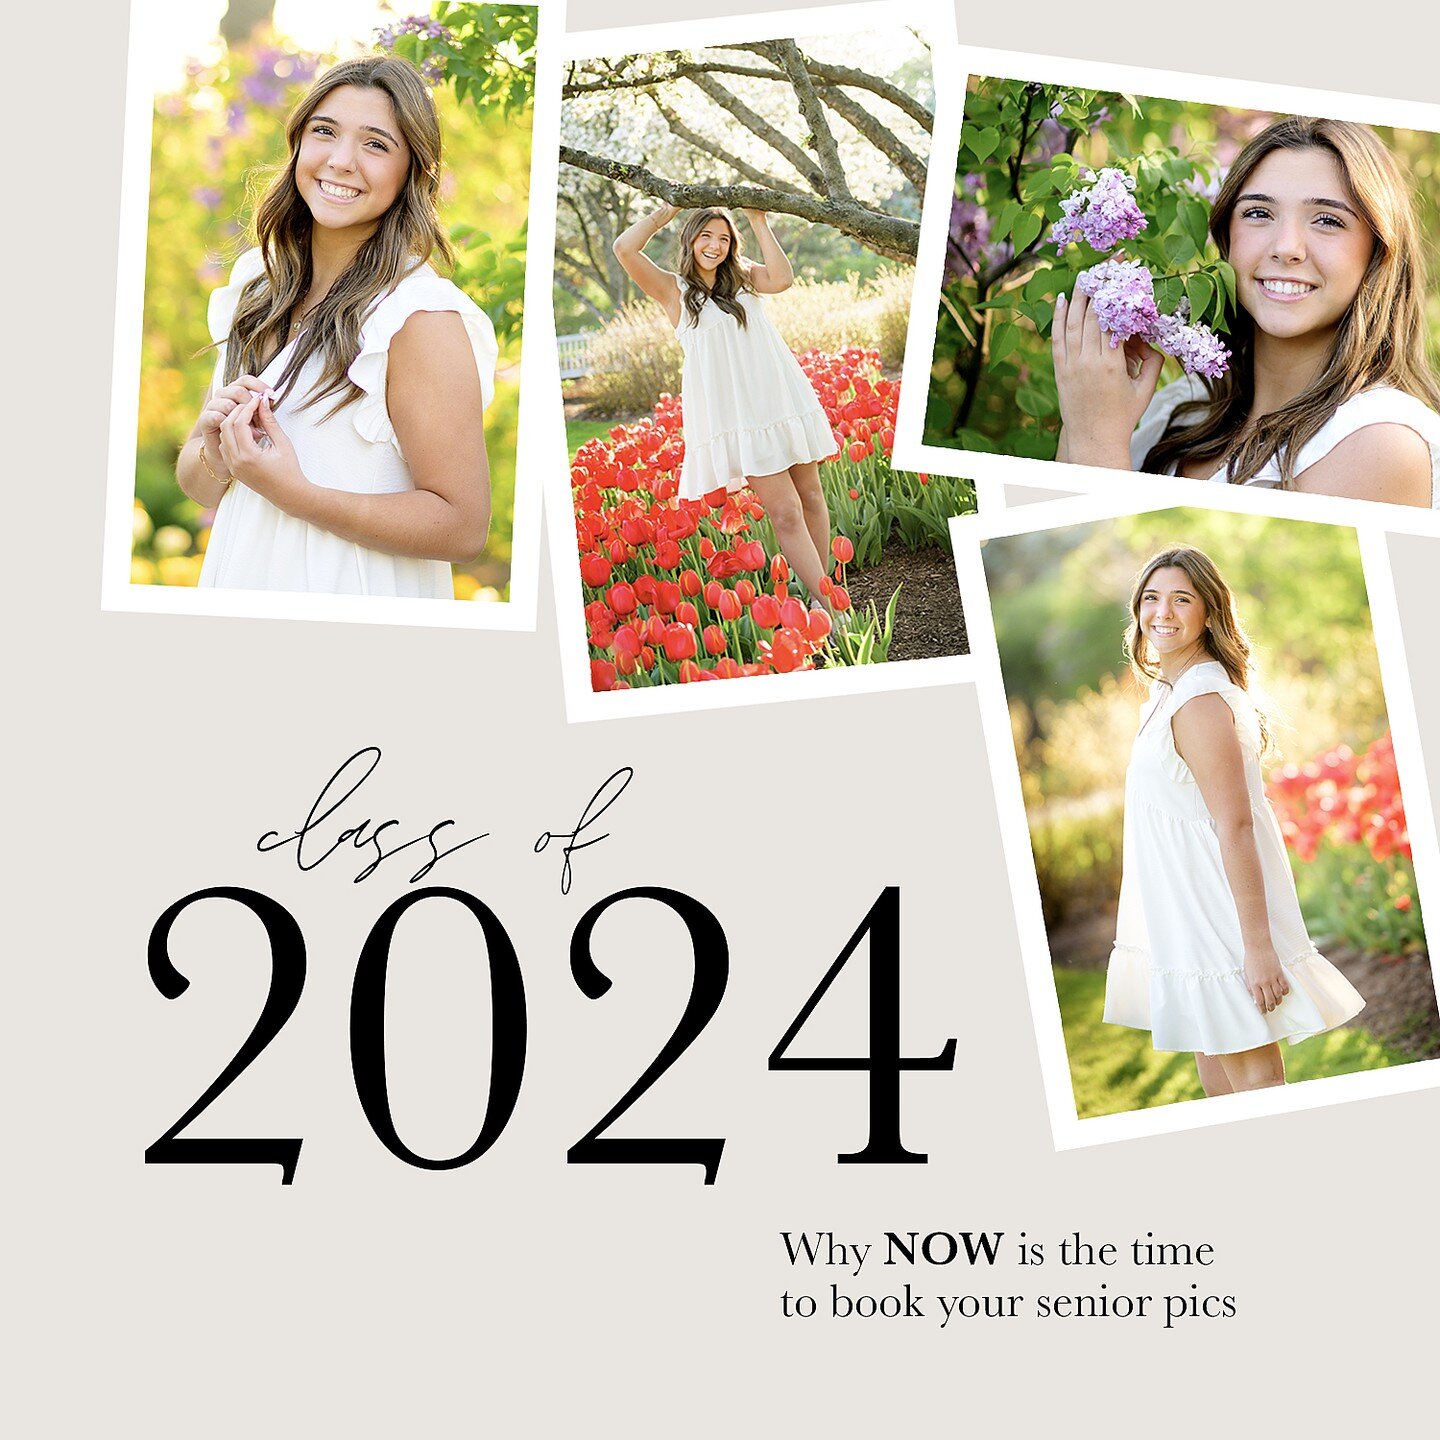 Class of 2024: Why NOW is the time to book your senior pics

In order to make sure you have your senior pictures ready for your grad card orders, grad party, and senior slide shows, let&rsquo;s find out how far in advance you&rsquo;ll want to have yo